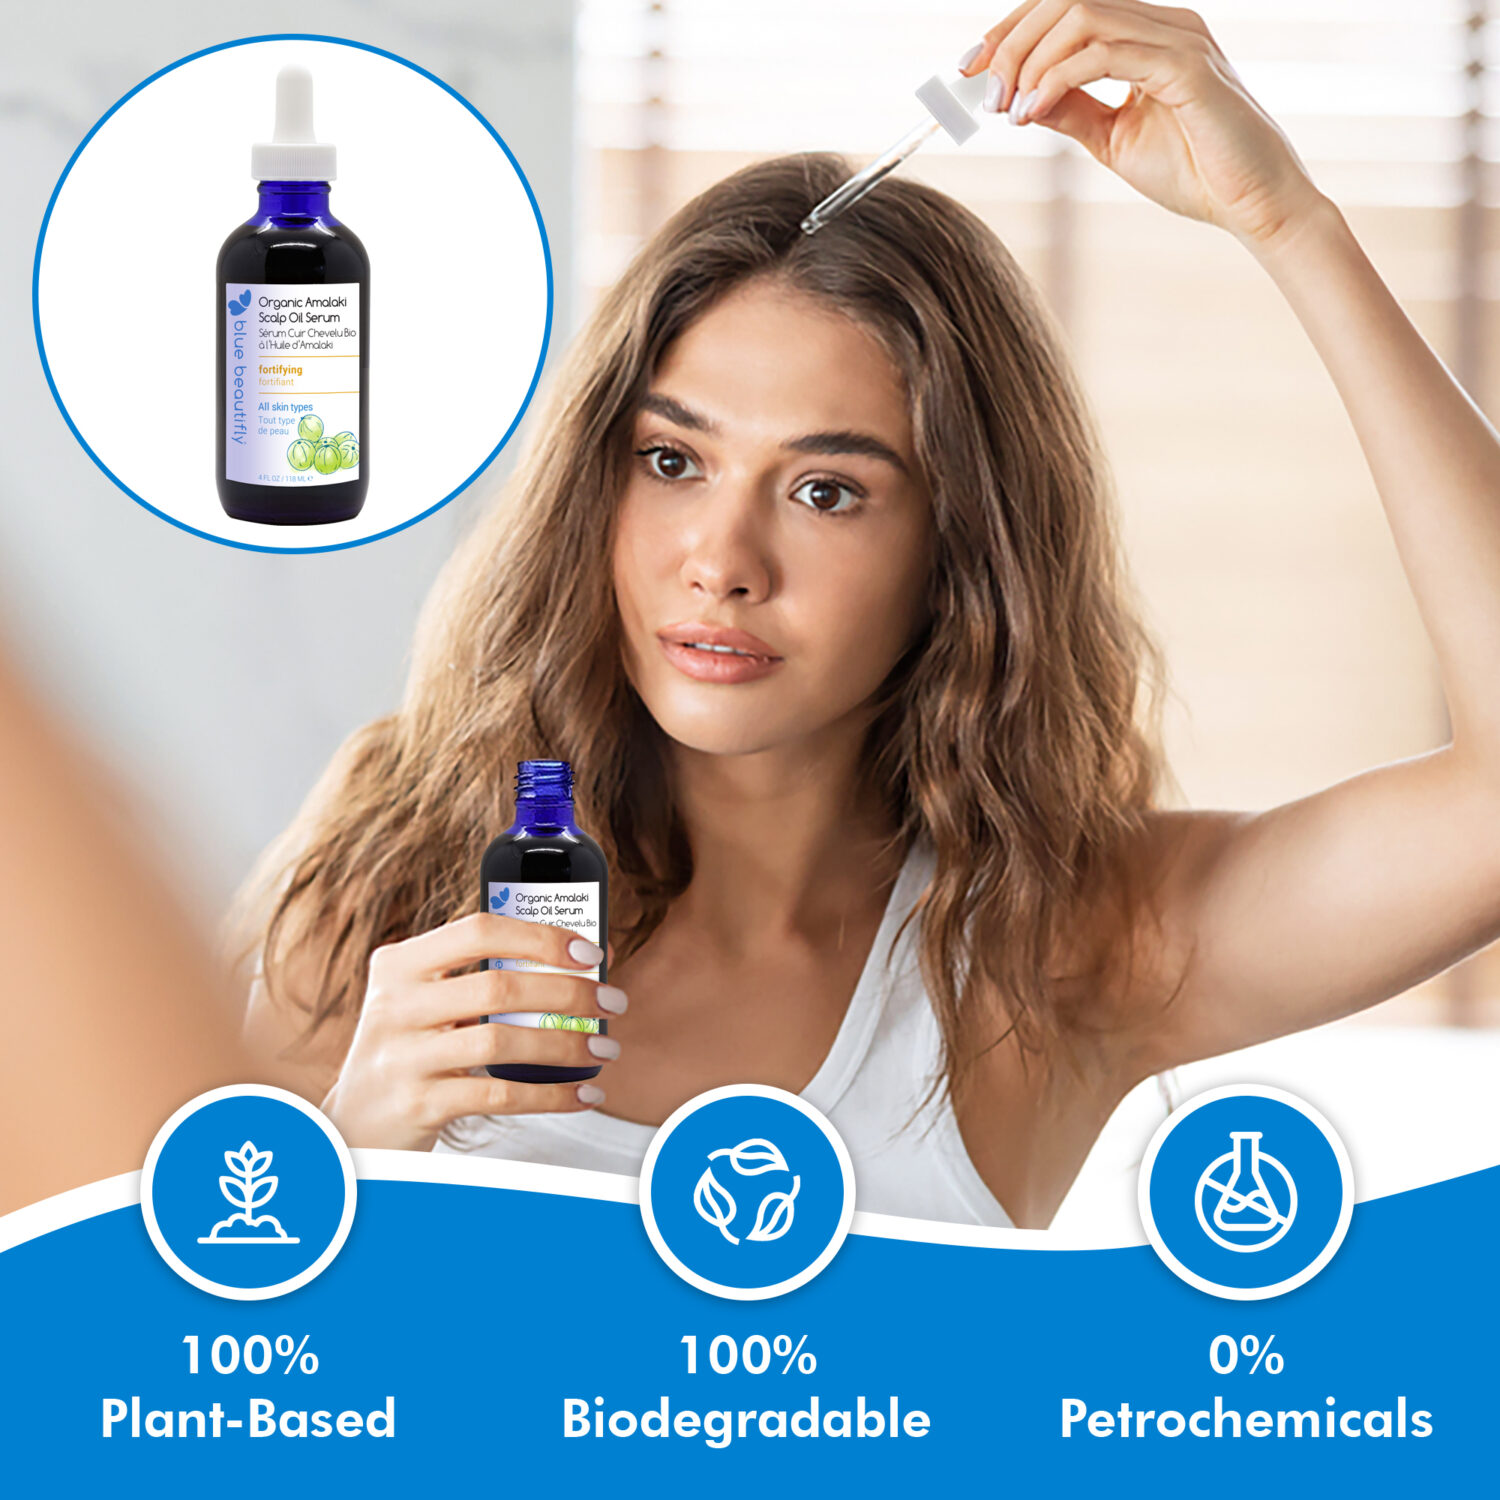 Blue Beautifly Organic Amalaki Scalp Oil Serum is 100% plant-based and biodegradable and contains no petrochemicals or toxins